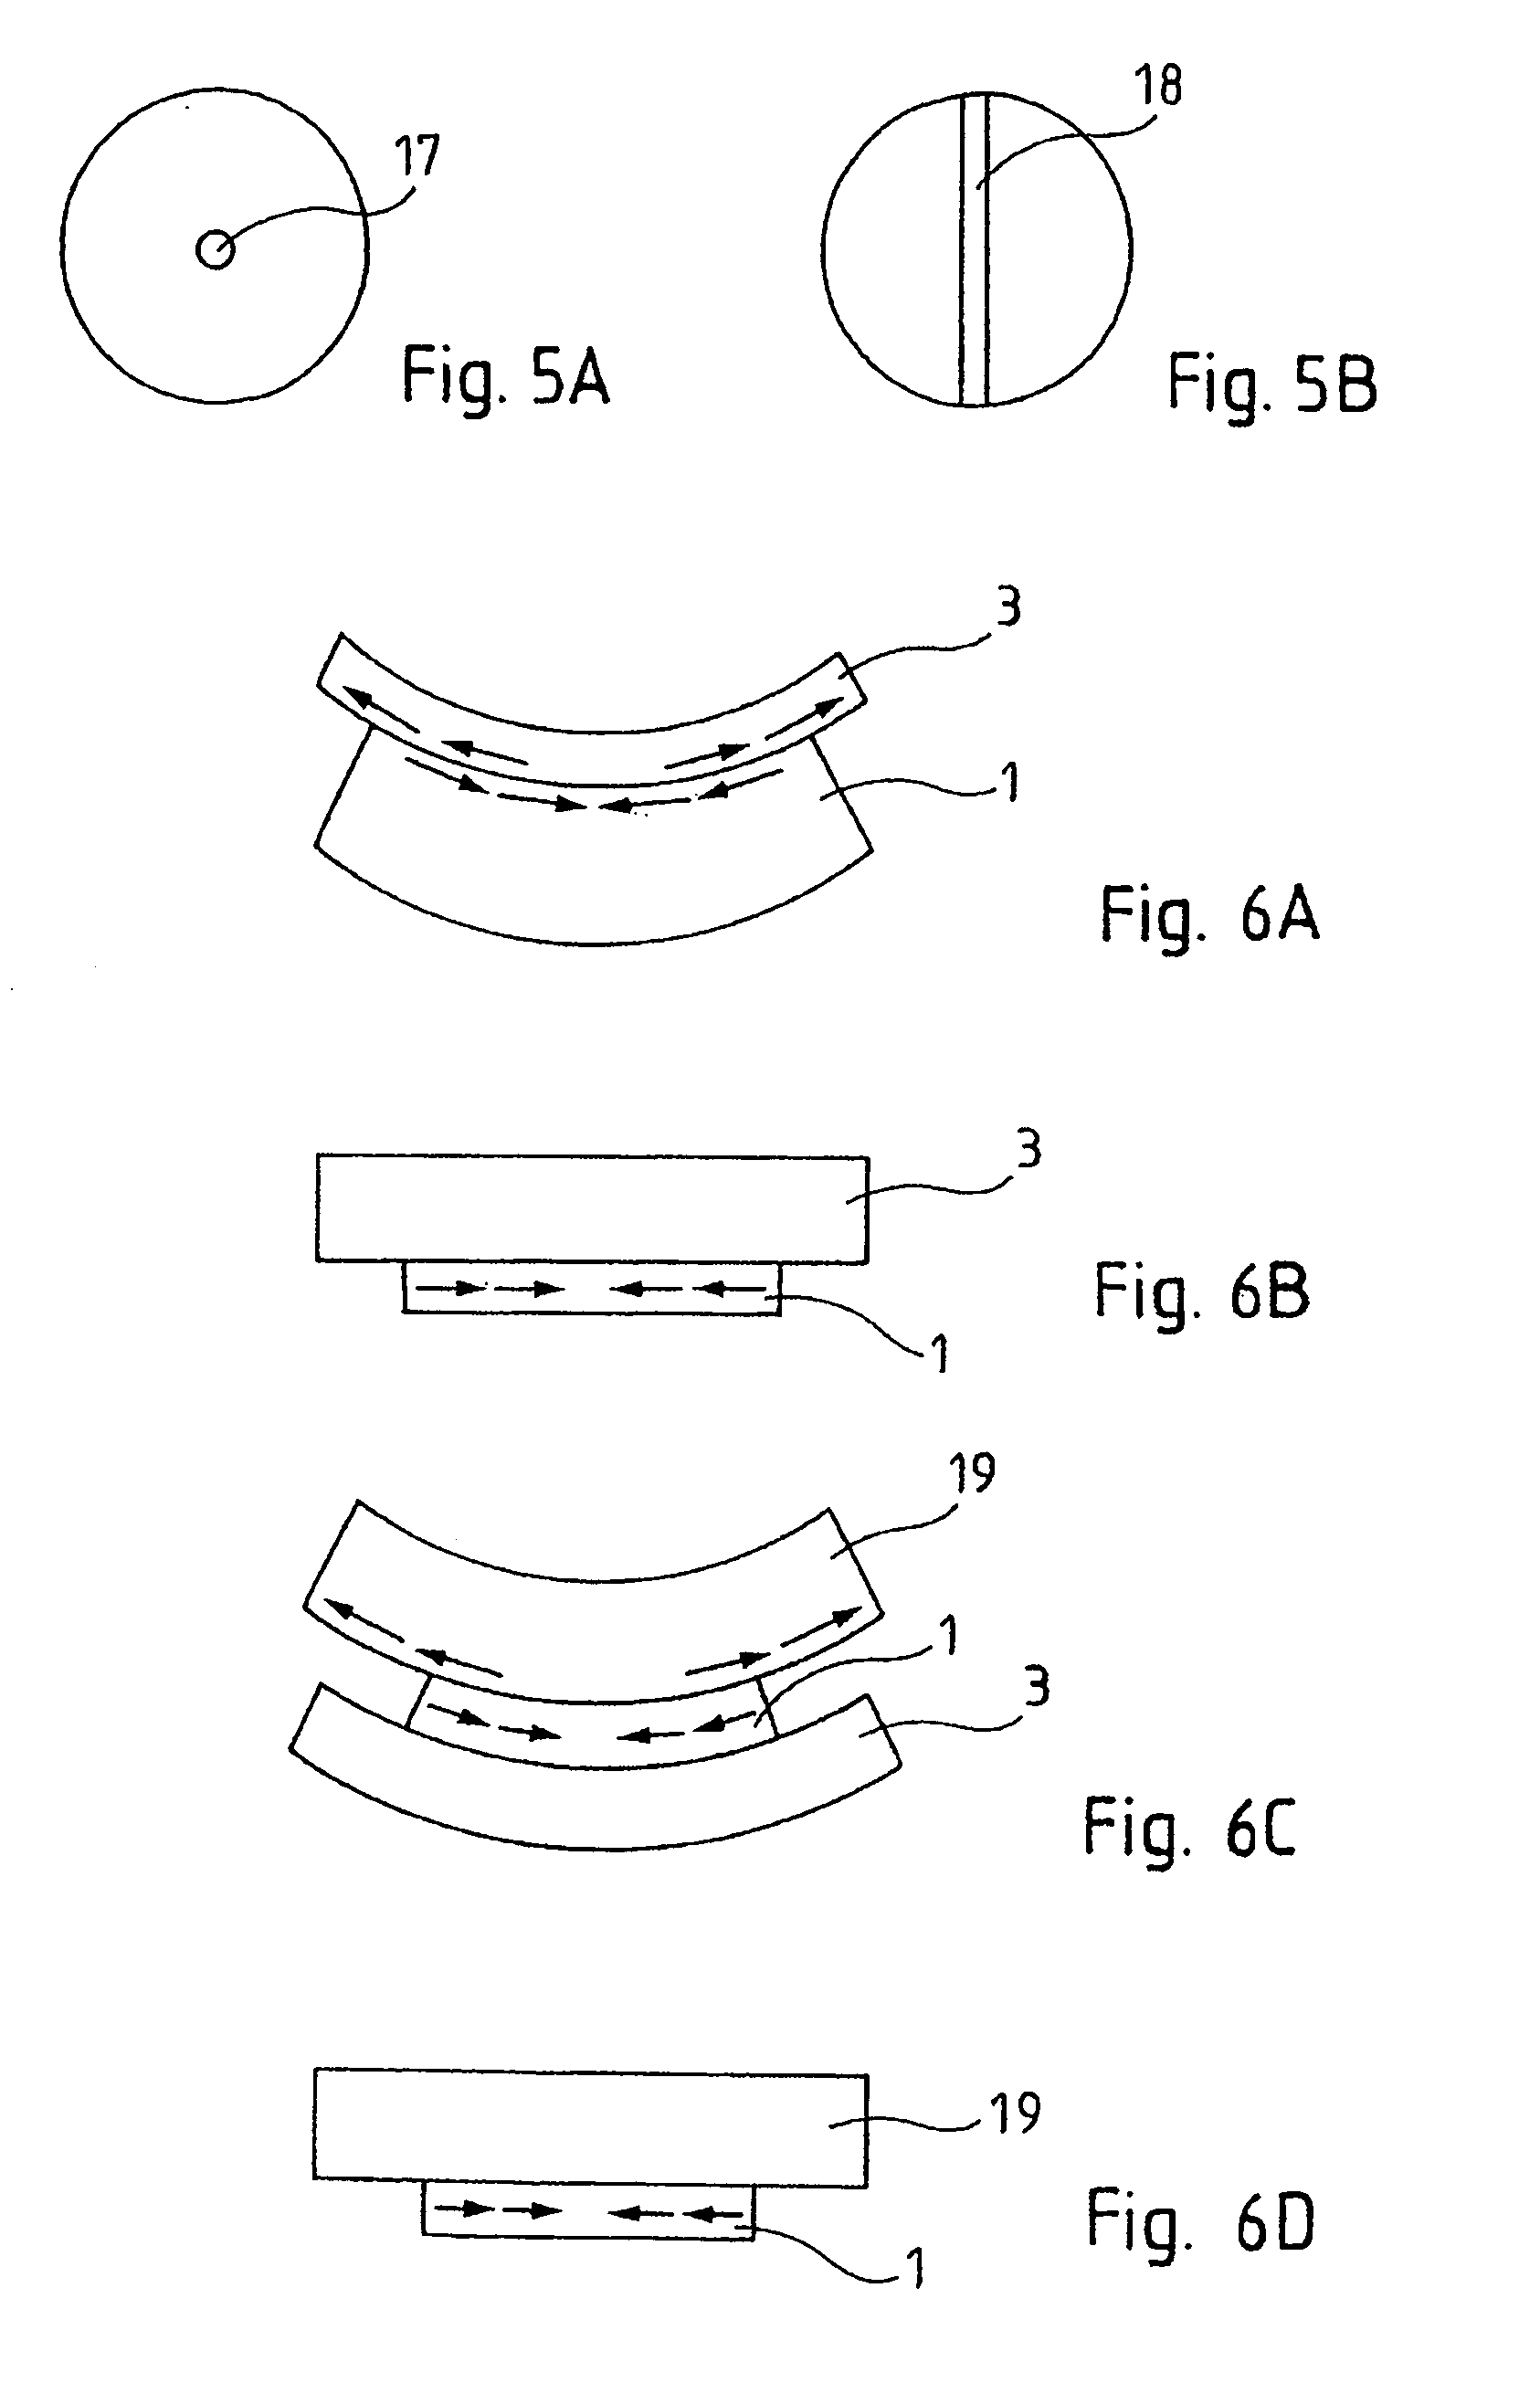 Method of producing a complex structure by assembling stressed structures